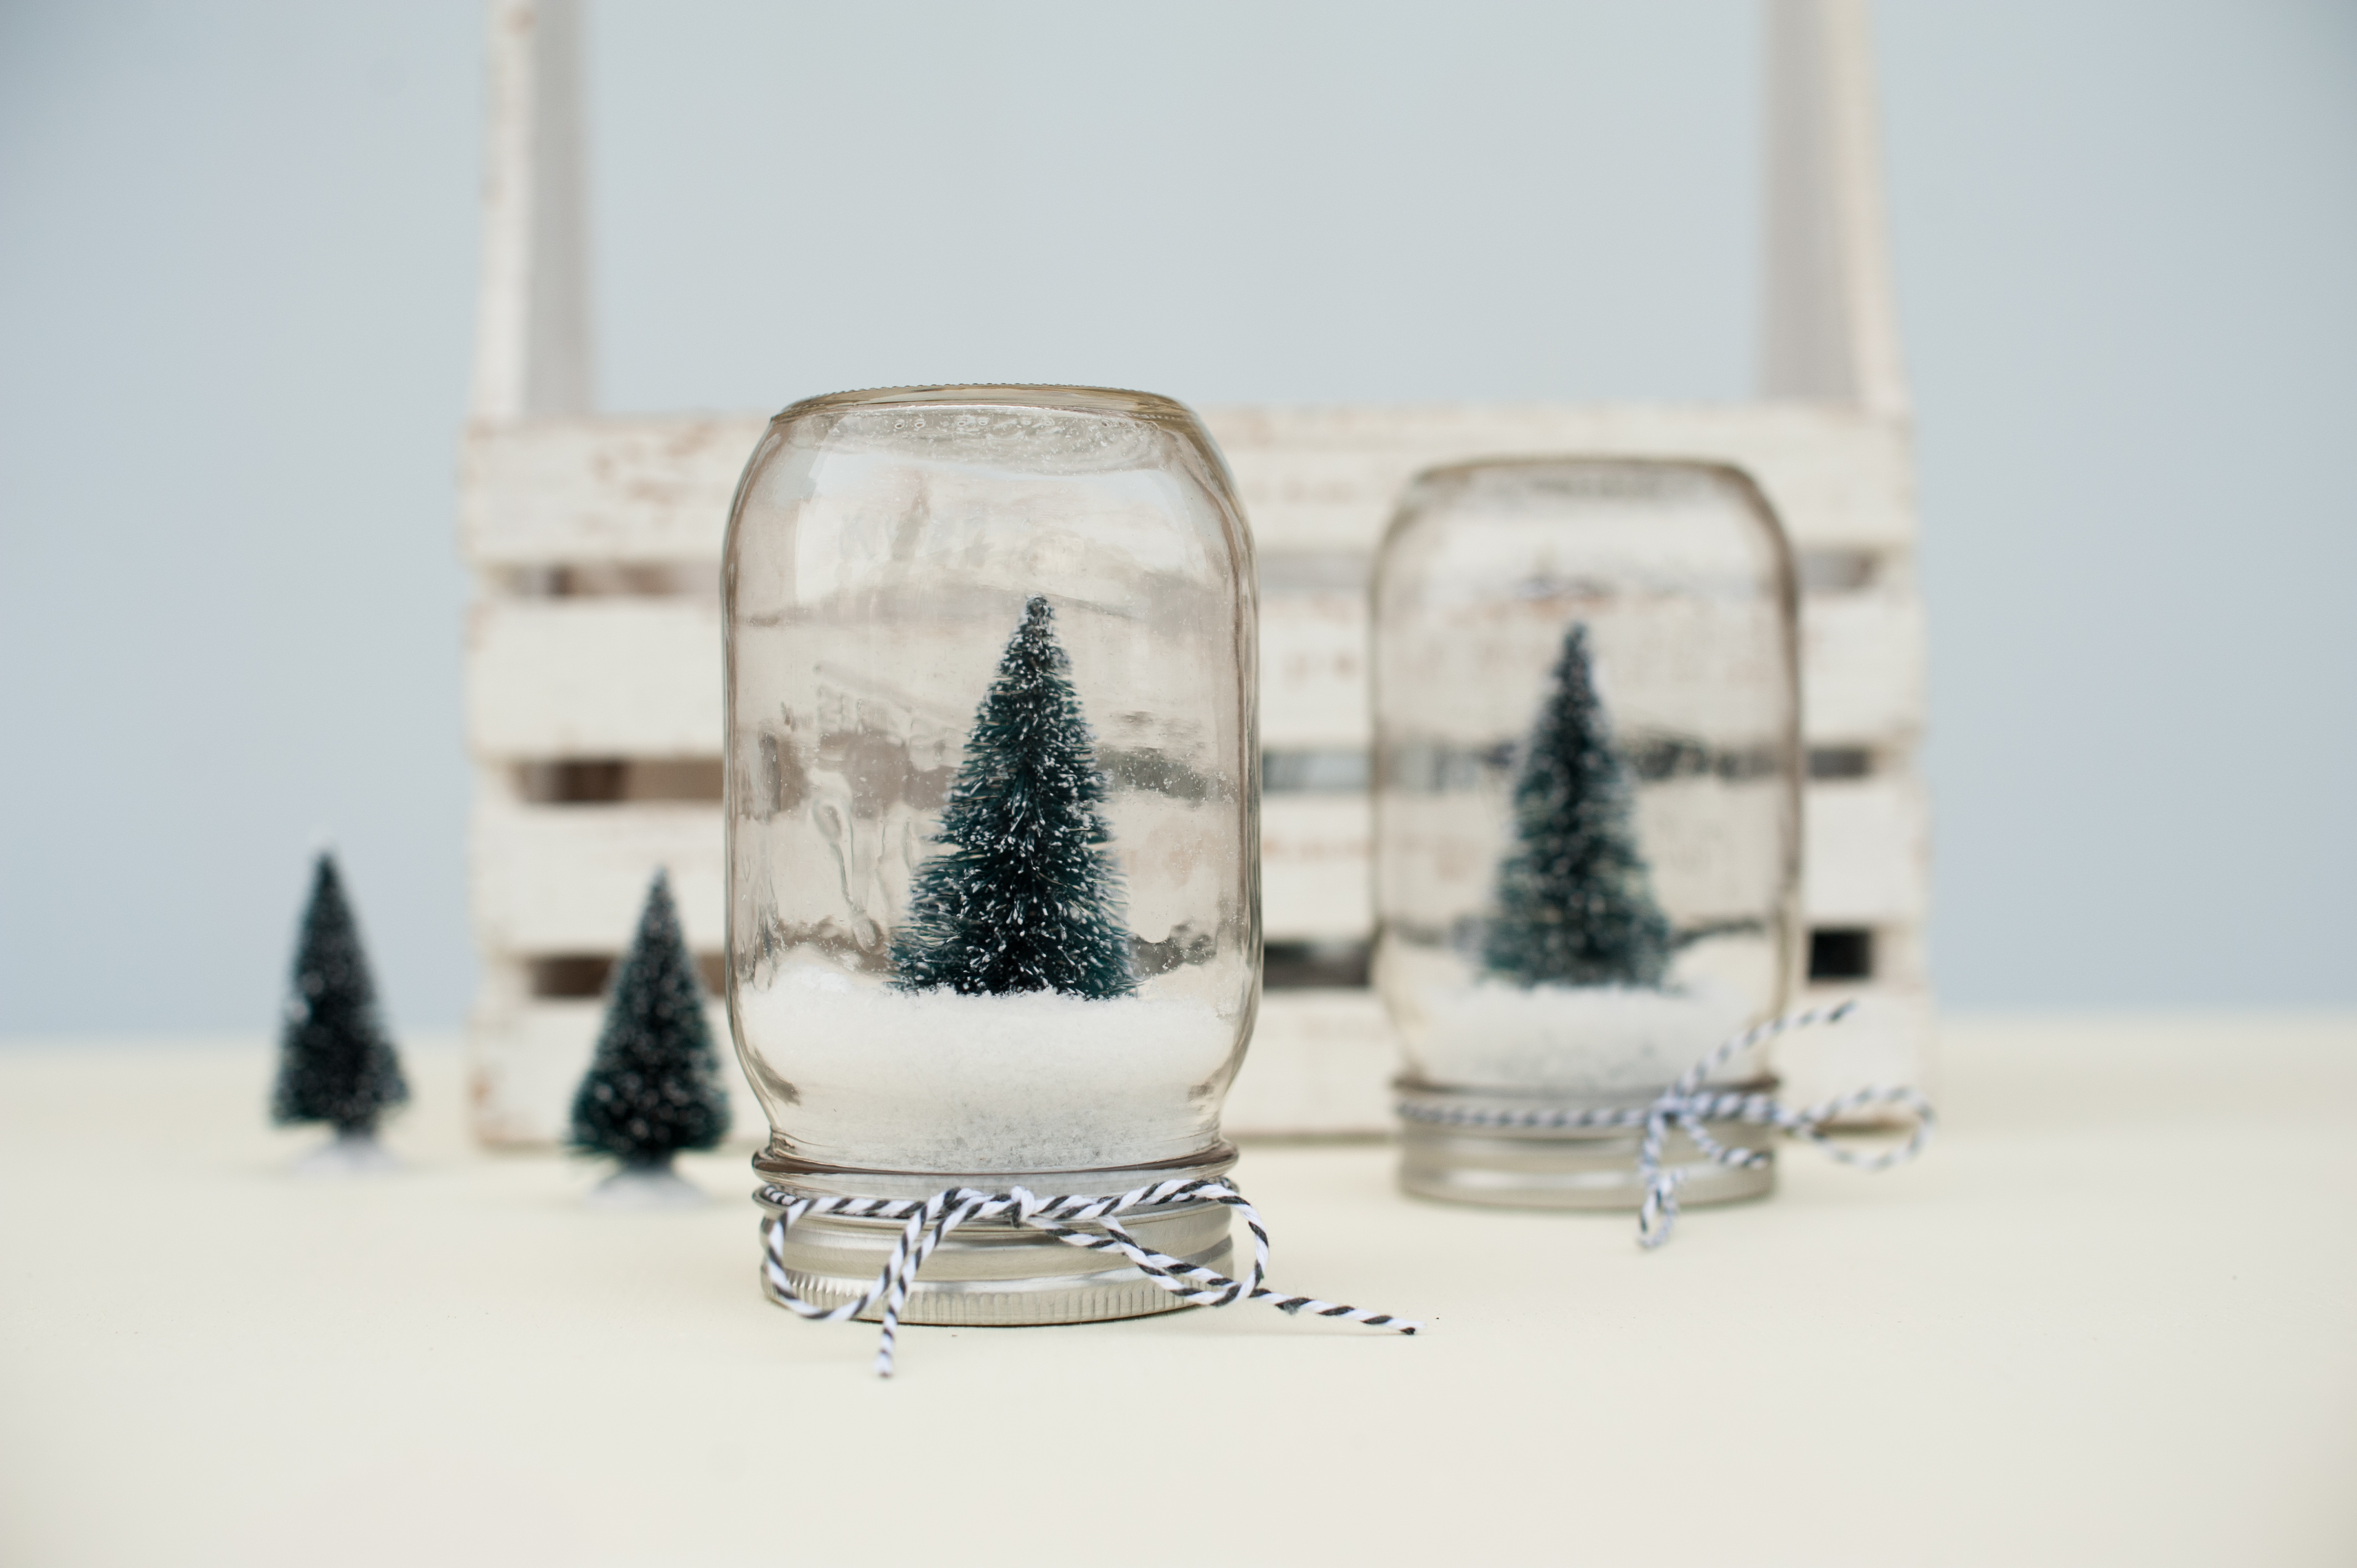 DIY Snow Globes You'll Love to Make for Christmas - DIY Candy